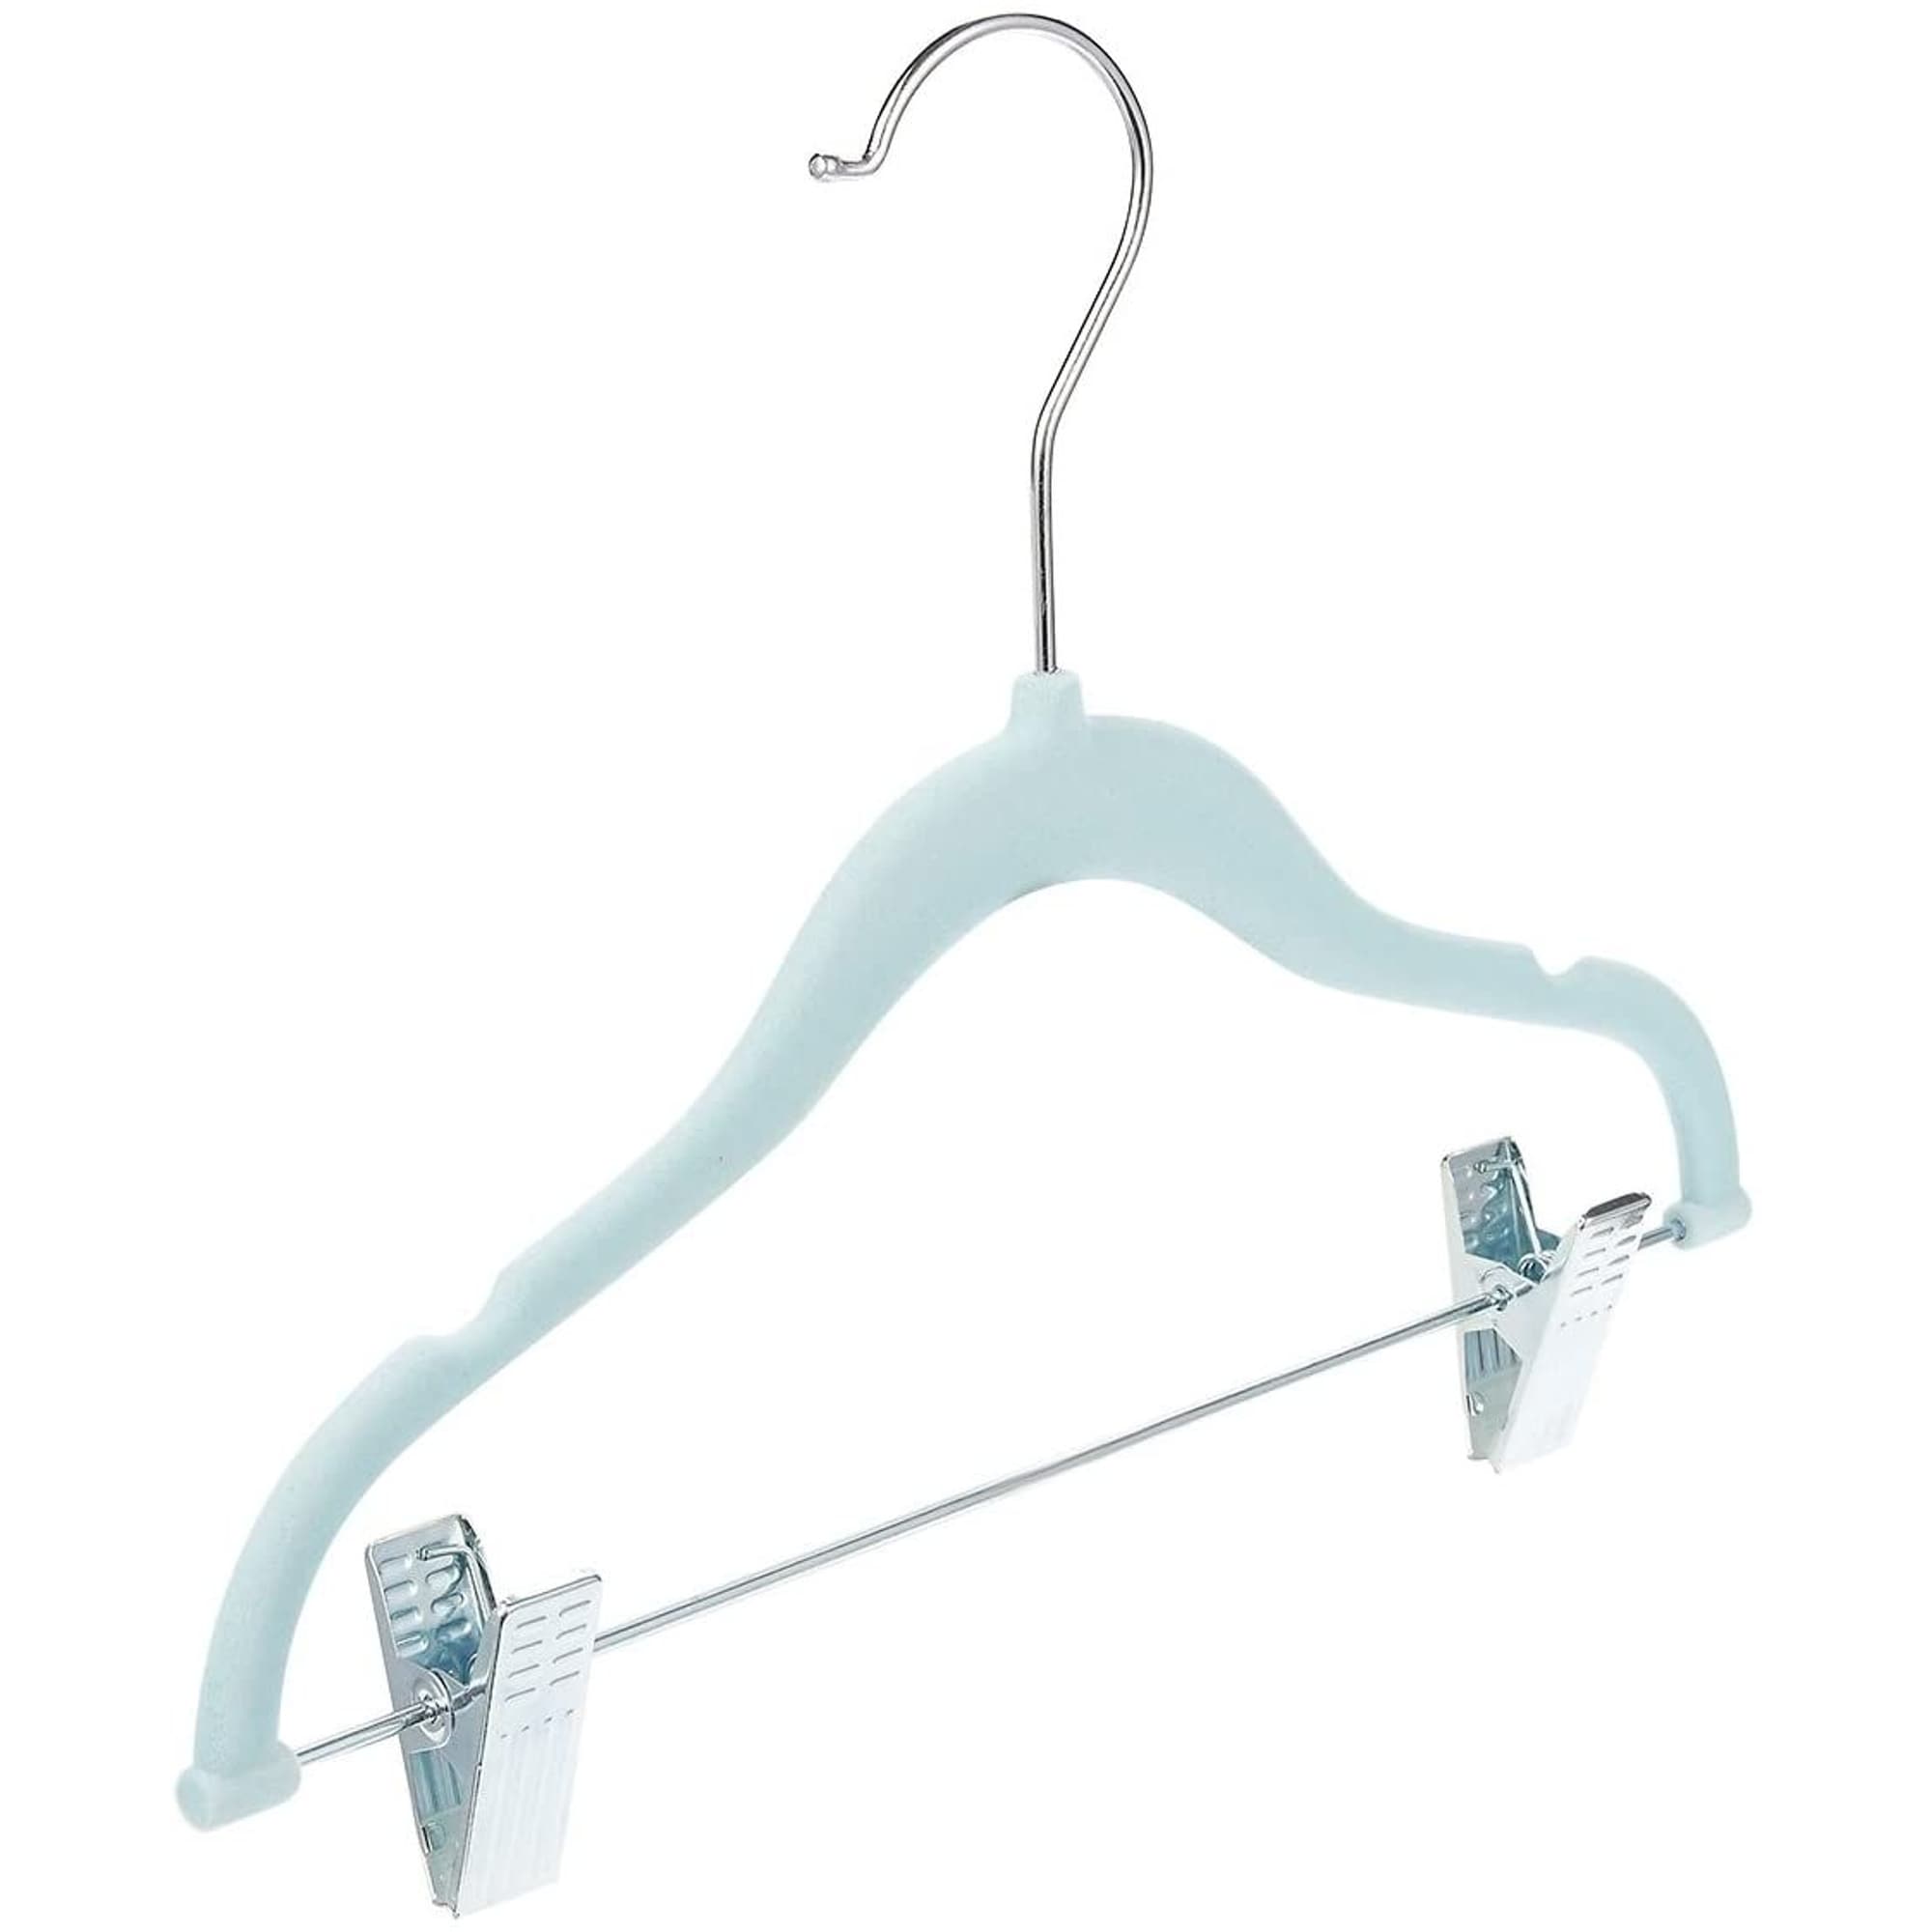 https://ak1.ostkcdn.com/images/products/is/images/direct/1f11bbef46ddaa7d82f8423e8daa63032334b8ed/Blue-Velvet-Clothes-Hangers-with-Clips-for-Baby-Nursery-and-Kids-Closet%2C-Ultra-Thin%2C-Nonslip-%2812-Inches%2C-24-Pack%29.jpg